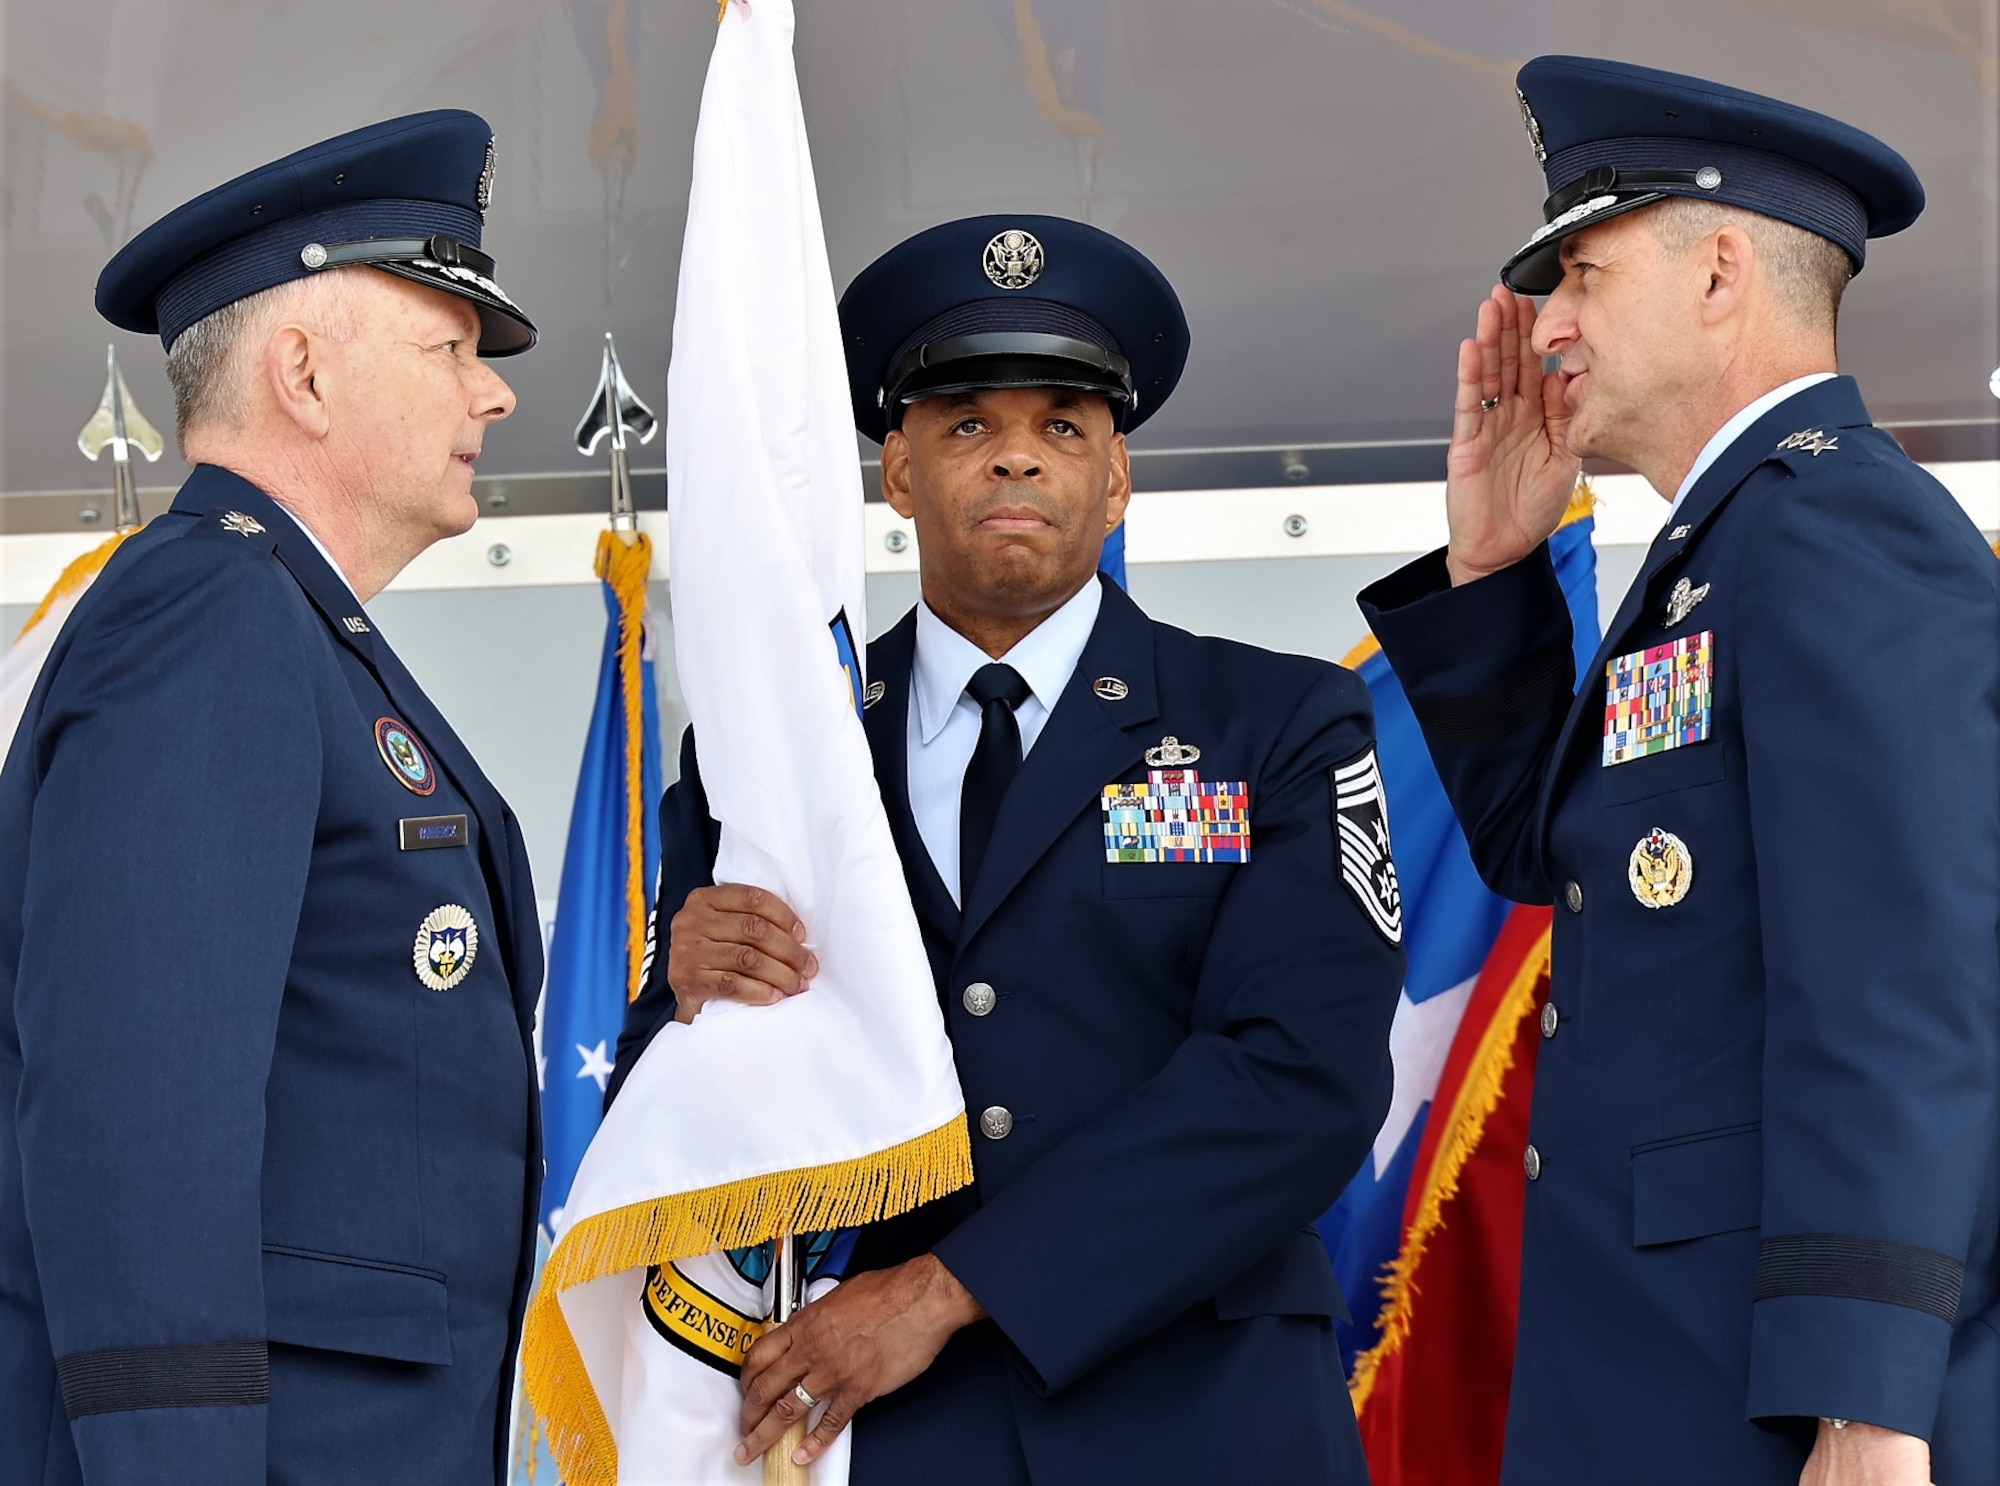 U.S. Air Force Lt. Gen. Steven S. Nordhaus, commander, Continental U.S. North 
American Aerospace Defense Command Region -- First Air Force (Air Forces 
Northern and Air Forces Space) prepares to accept the CONR guidon from Gen. 
Glen VanHerck, commander, North American Aerospace Defense Command and U.S. 
Northern Command, during a Change of Command ceremony March 31, 2023, Tyndall 
AFB, Fla. VanHerck, along with Gen. James H. Dickinson, commander, U.S. Space 
Command, and Gen. Mark Kelly, commander, Air Combat Command, officiated the 
CONR-1 AF (AFNORTH & AFSPACE) Change of Command.